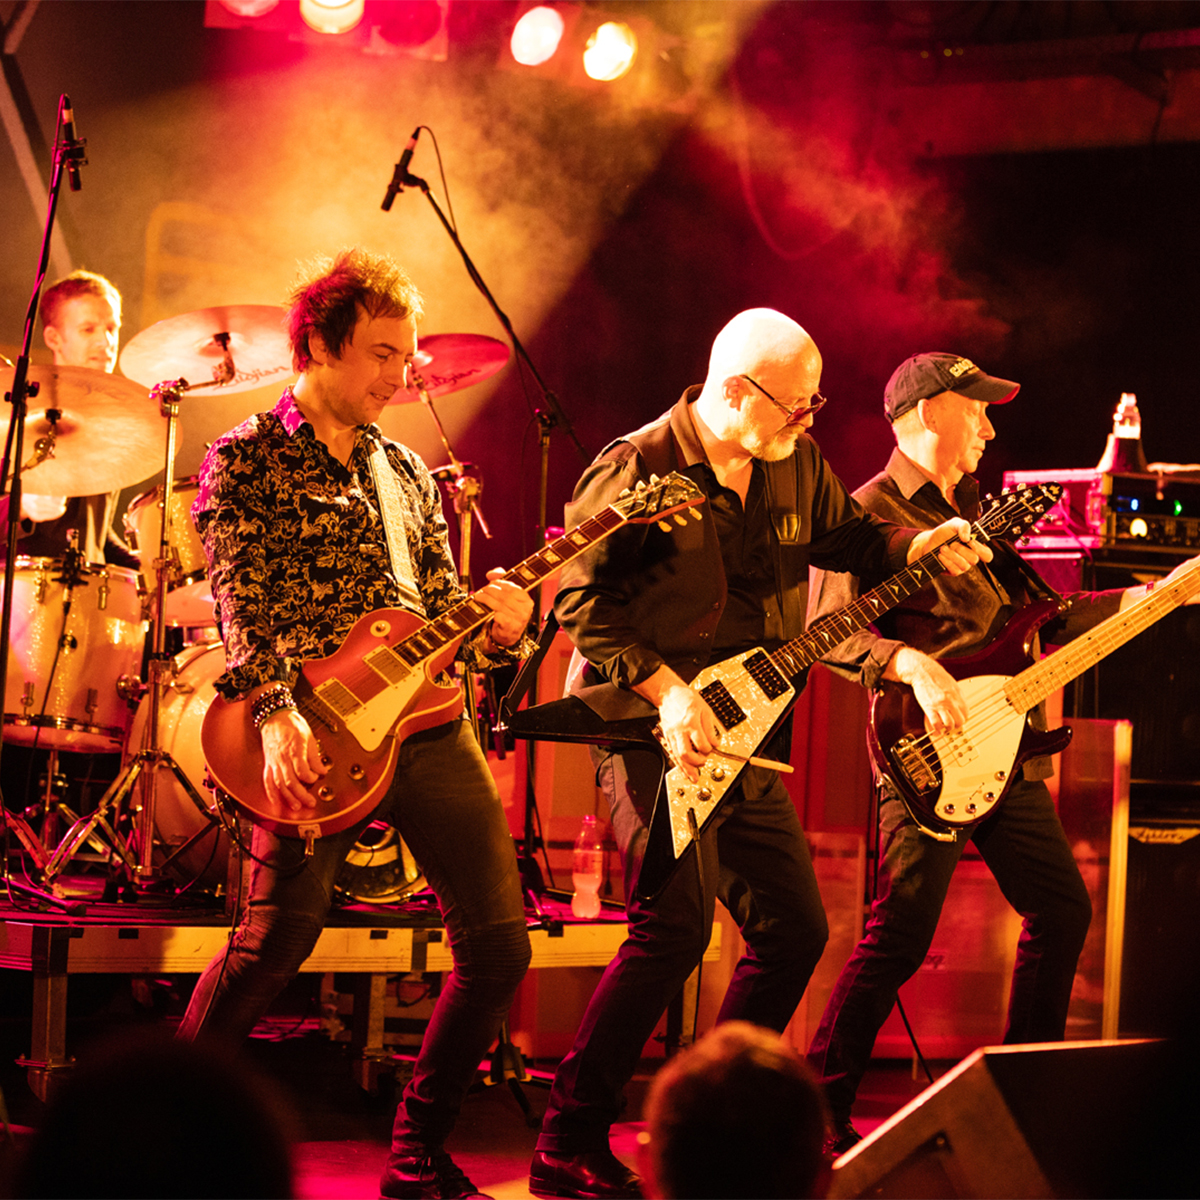 Buy Tickets to WISHBONE ASH Late To The Party Tour featuring ‘Argus